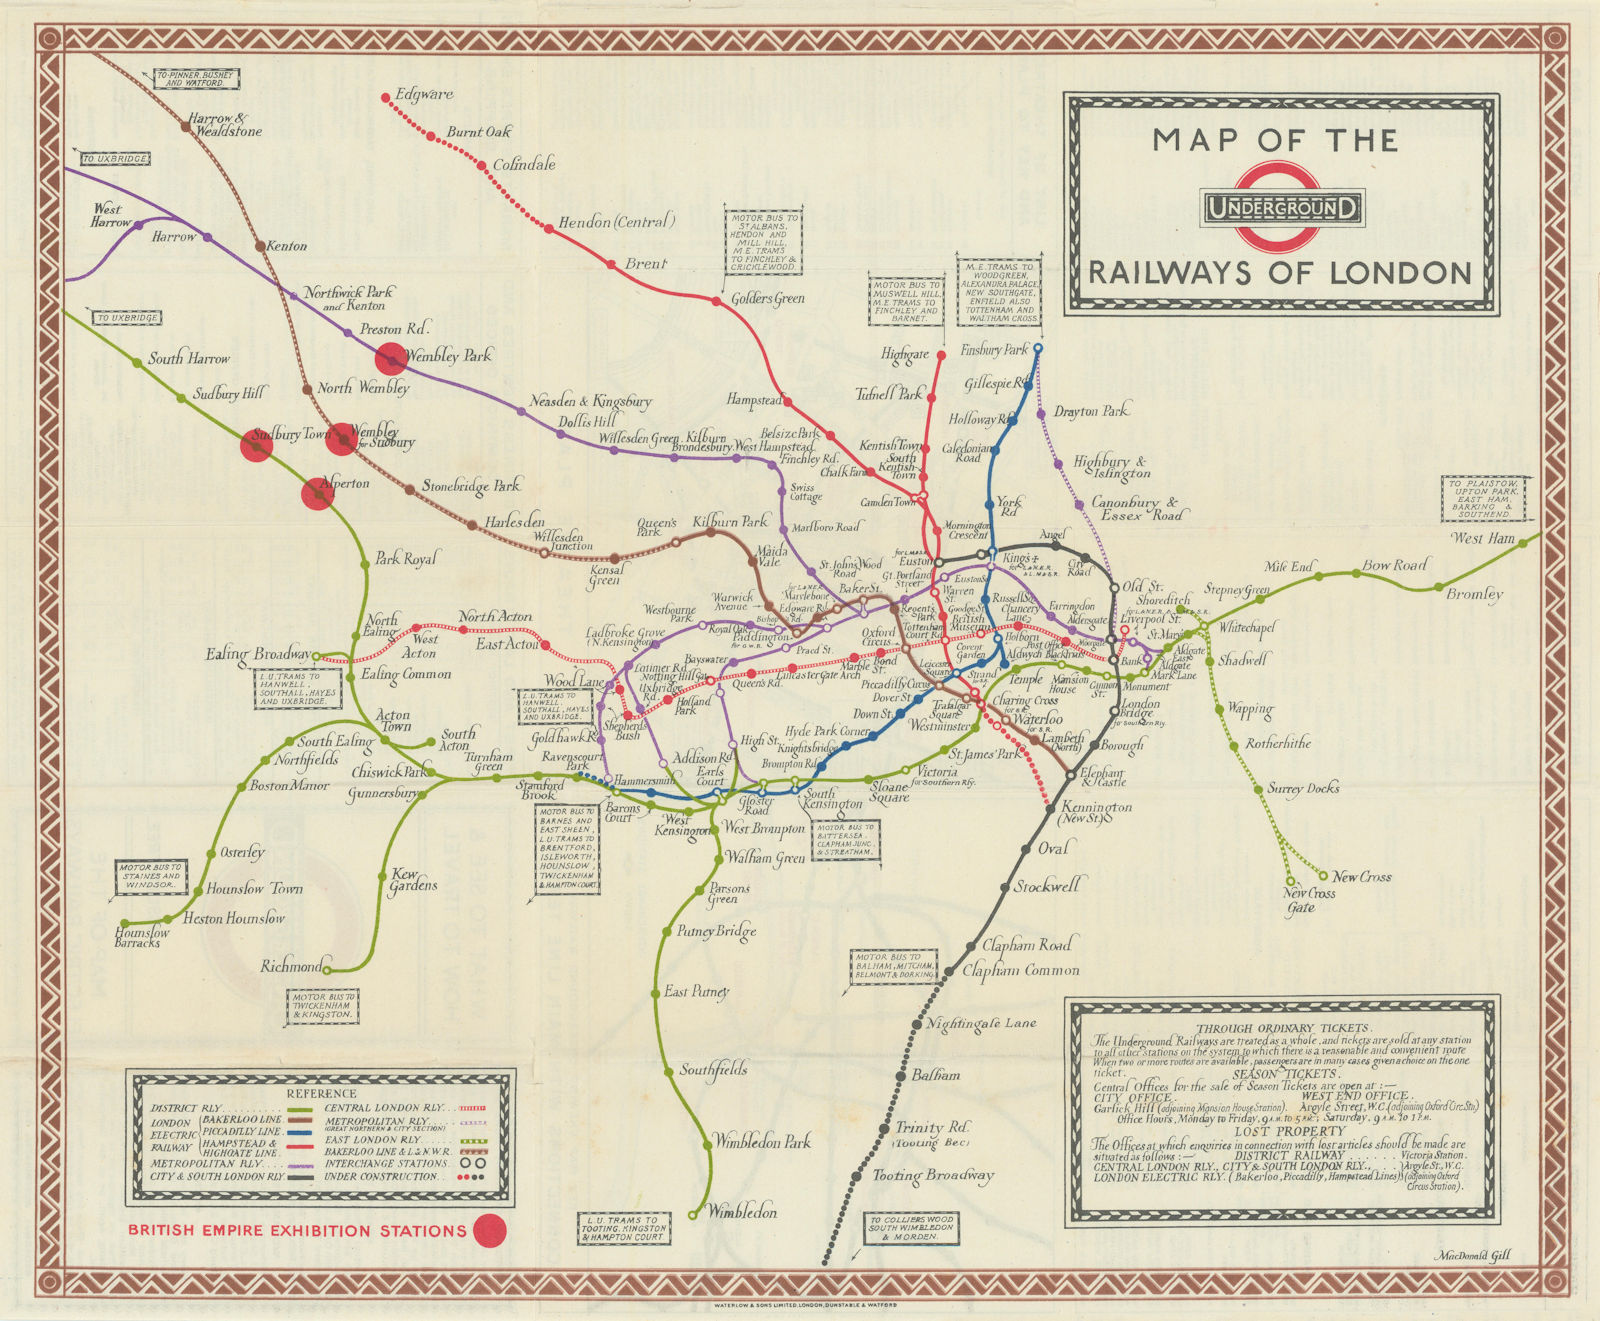 Associate Product Map of the Underground Railways of London by Macdonald Gill. November 1923